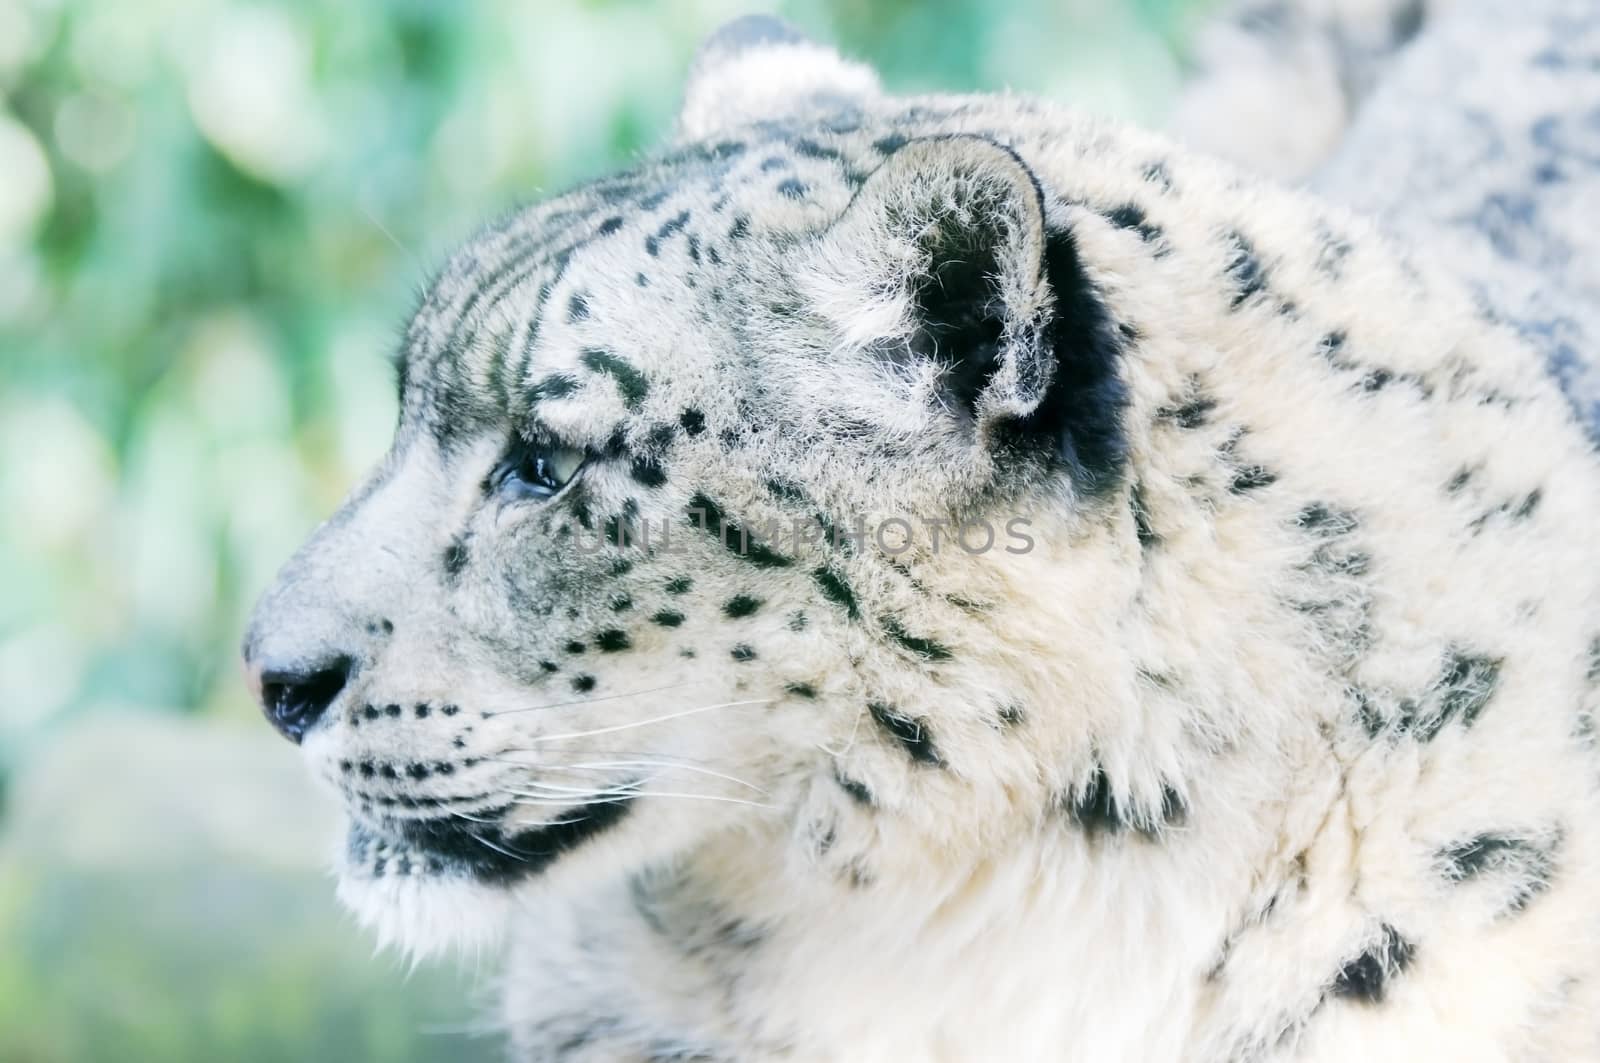 Snow Leopard Alert by kmwphotography